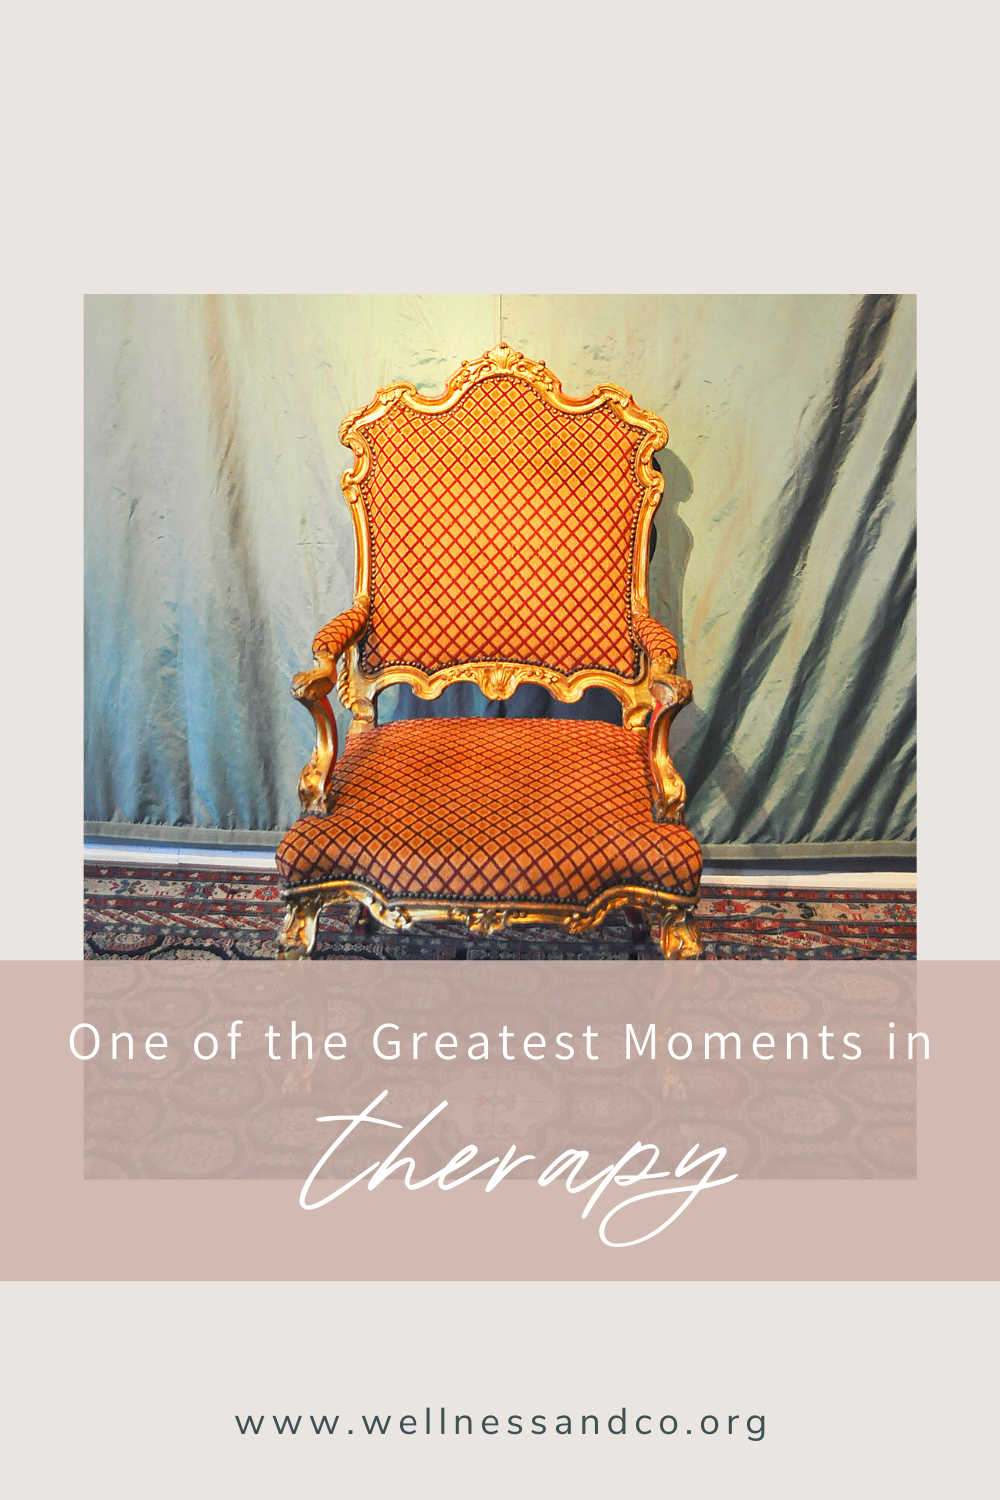 One of the Greatest Moments in Therapy | This post explores, in poem form, a celebratory moment in therapy when a client did something really incredible. Get an inside look into that process and how success in therapy feels, cheers!